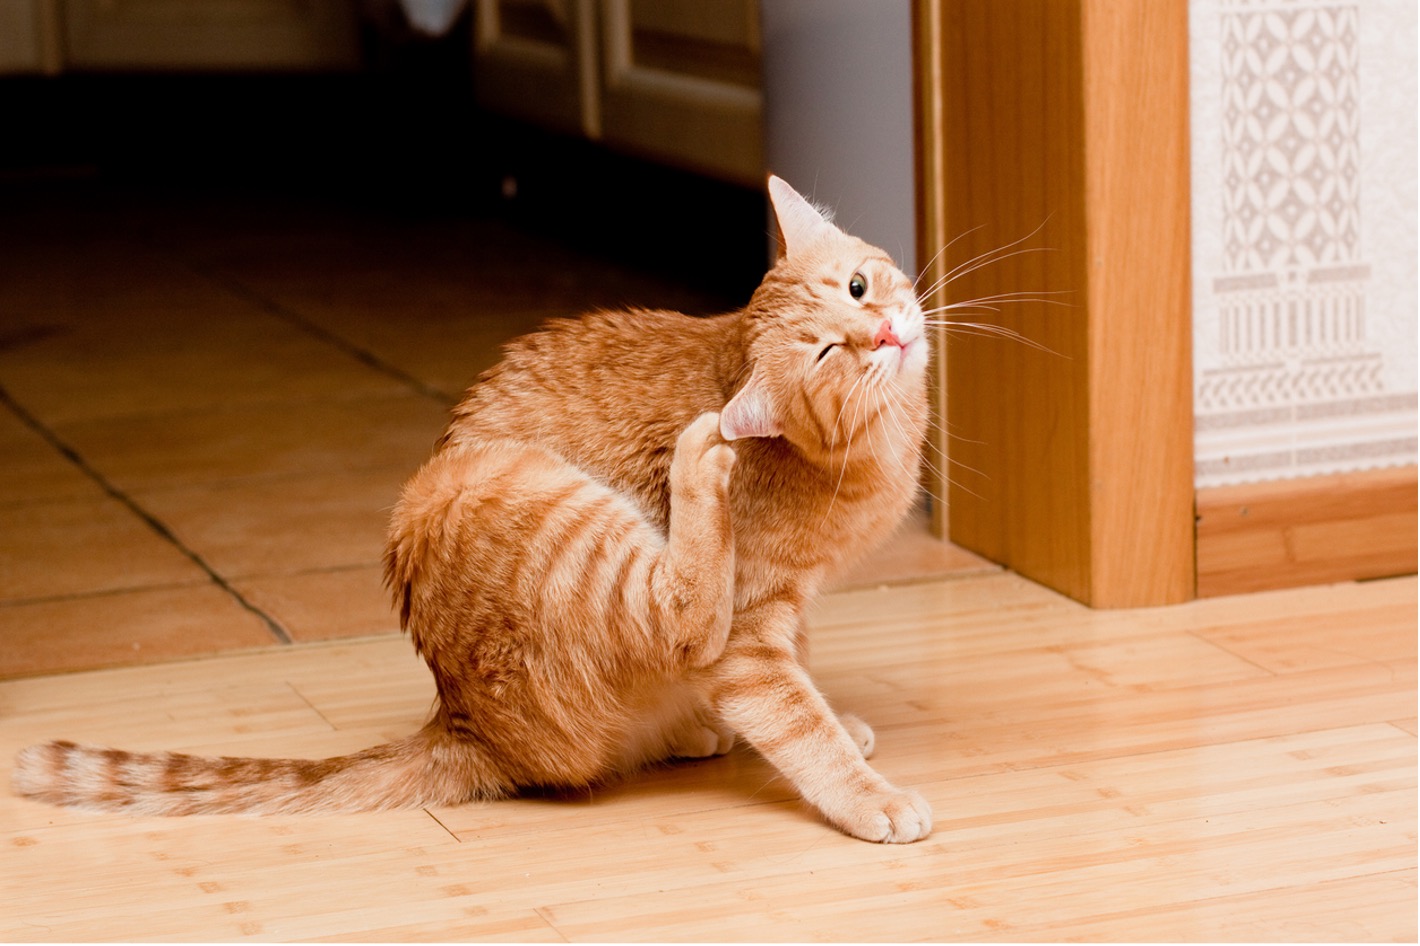 A cat scratching its head on a wood floor